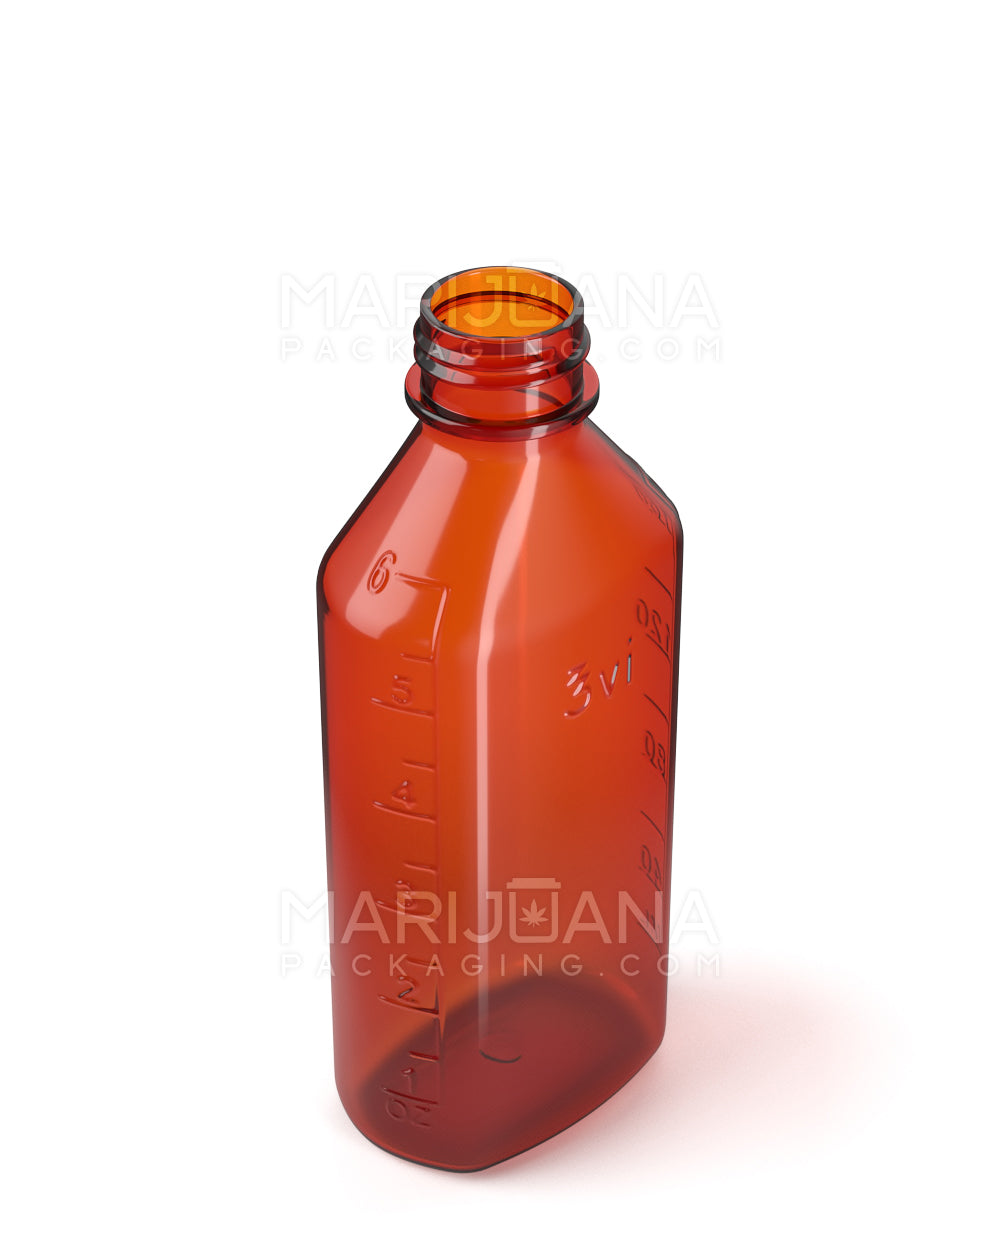 Child Resistant | Push Down & Turn Plastic Syrup Bottles | 6oz - Amber - 100 Count - 7